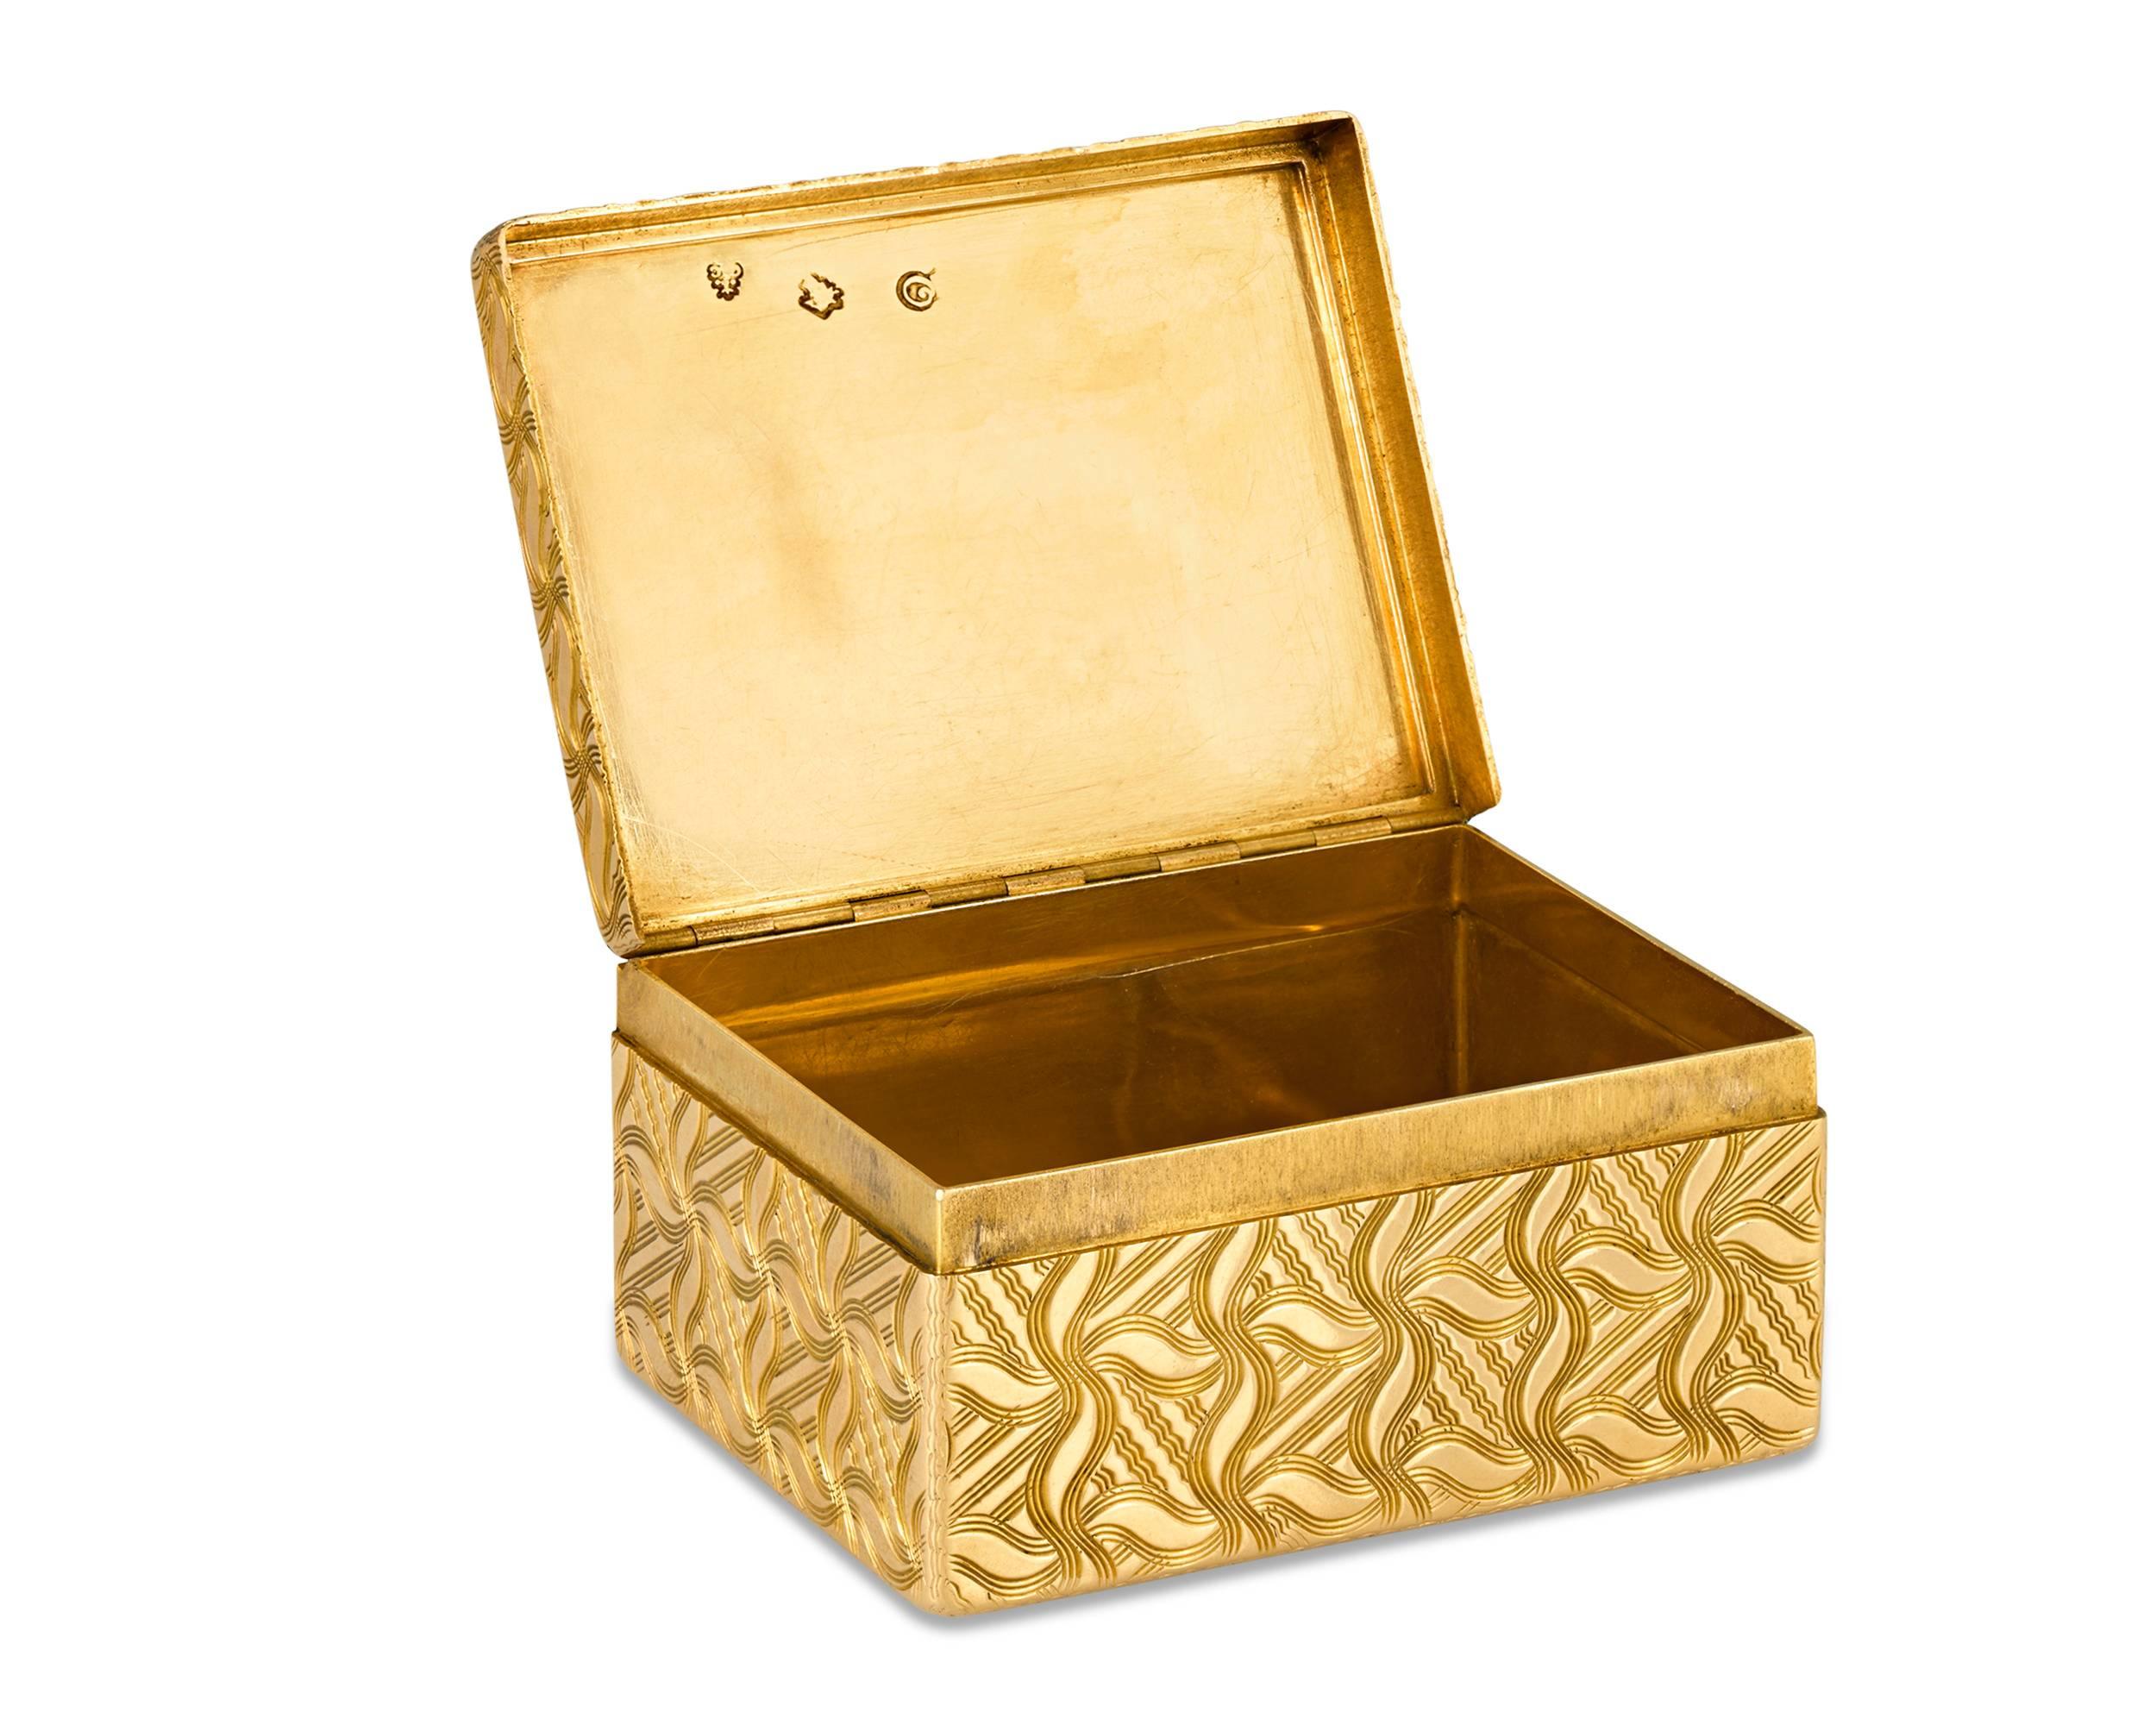 This luxurious Louis XV-period gold snuffbox was crafted by master French goldsmith Germain Chayé. Formed of 18-karat yellow gold, this exceptional box displays remarkable artistry with intricate engine-turned guilloché and tracery covering the